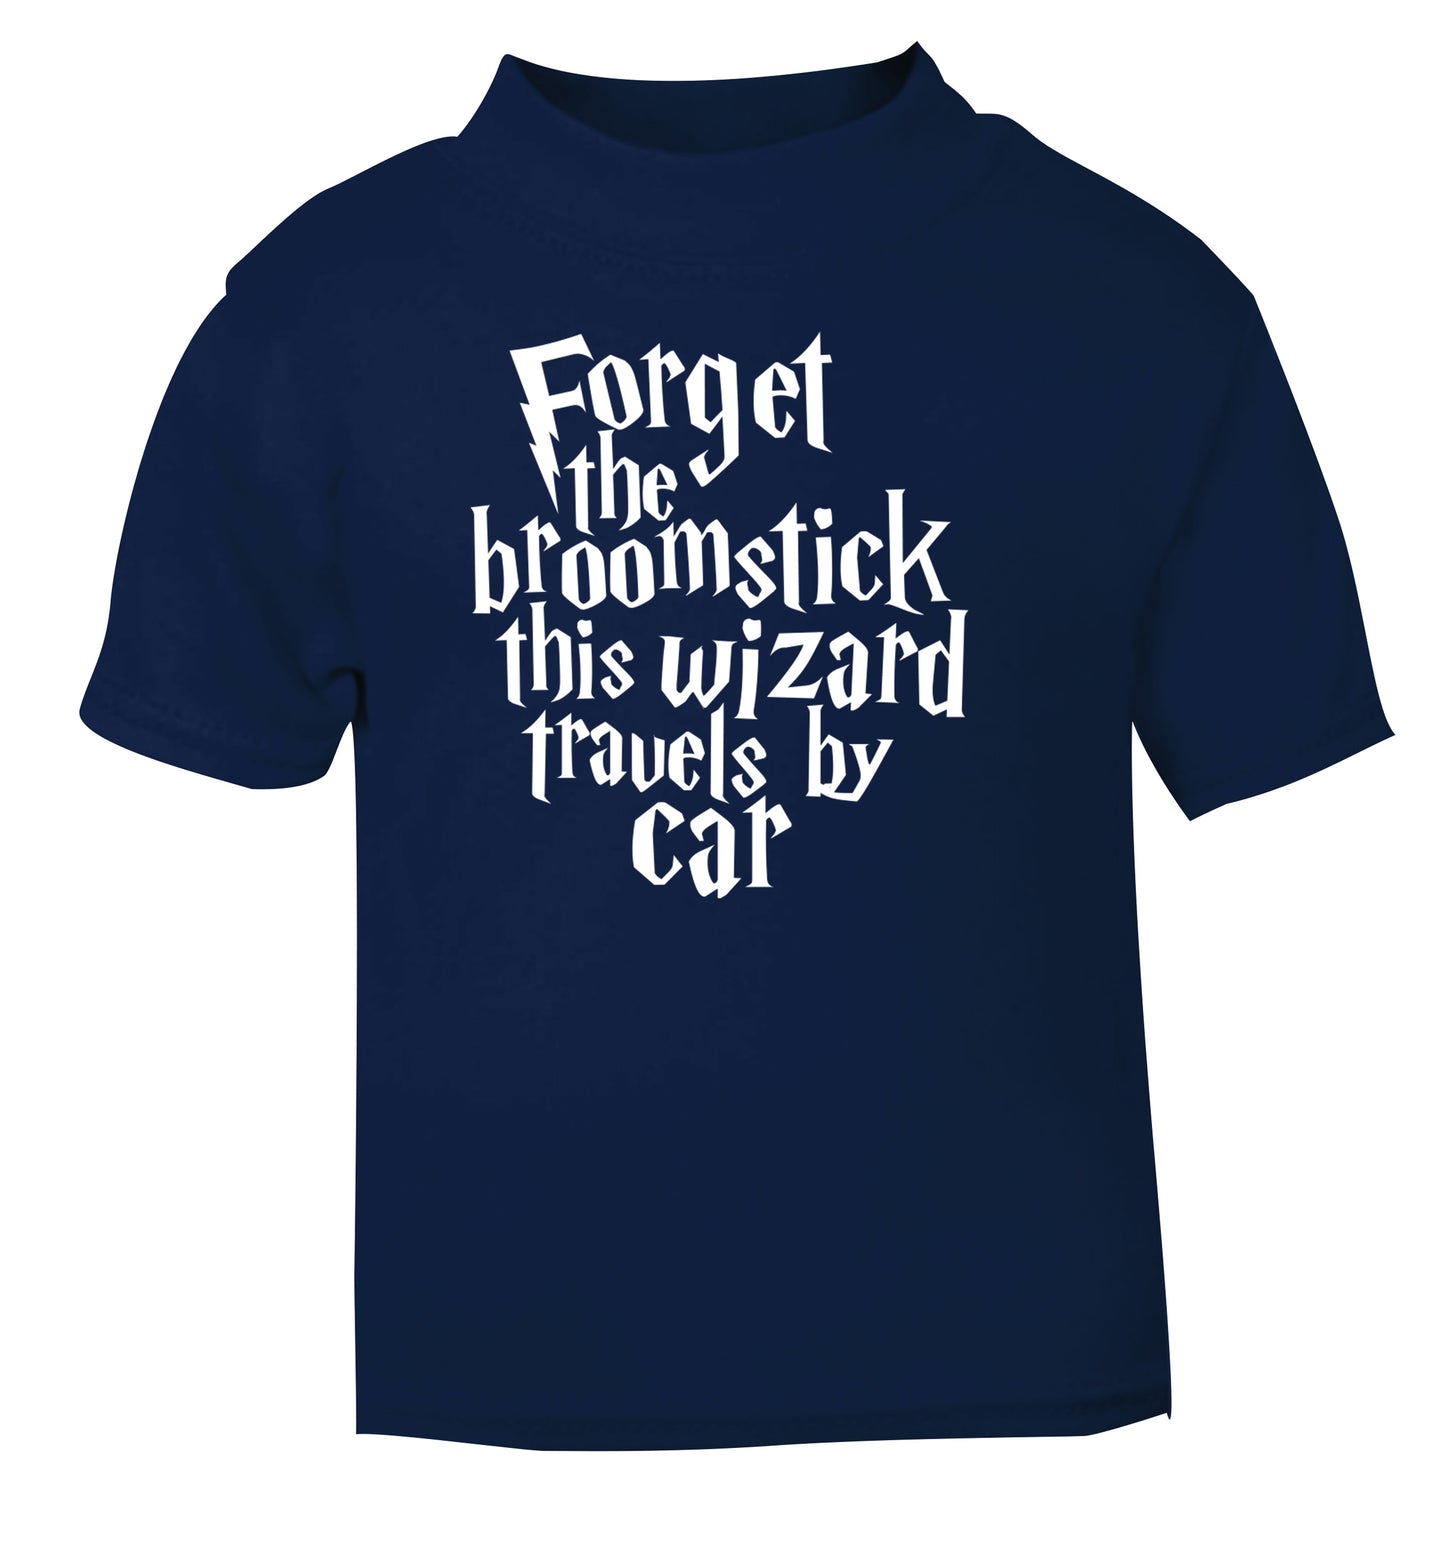 Forget the broomstick this wizard travels by car navy Baby Toddler Tshirt 2 Years